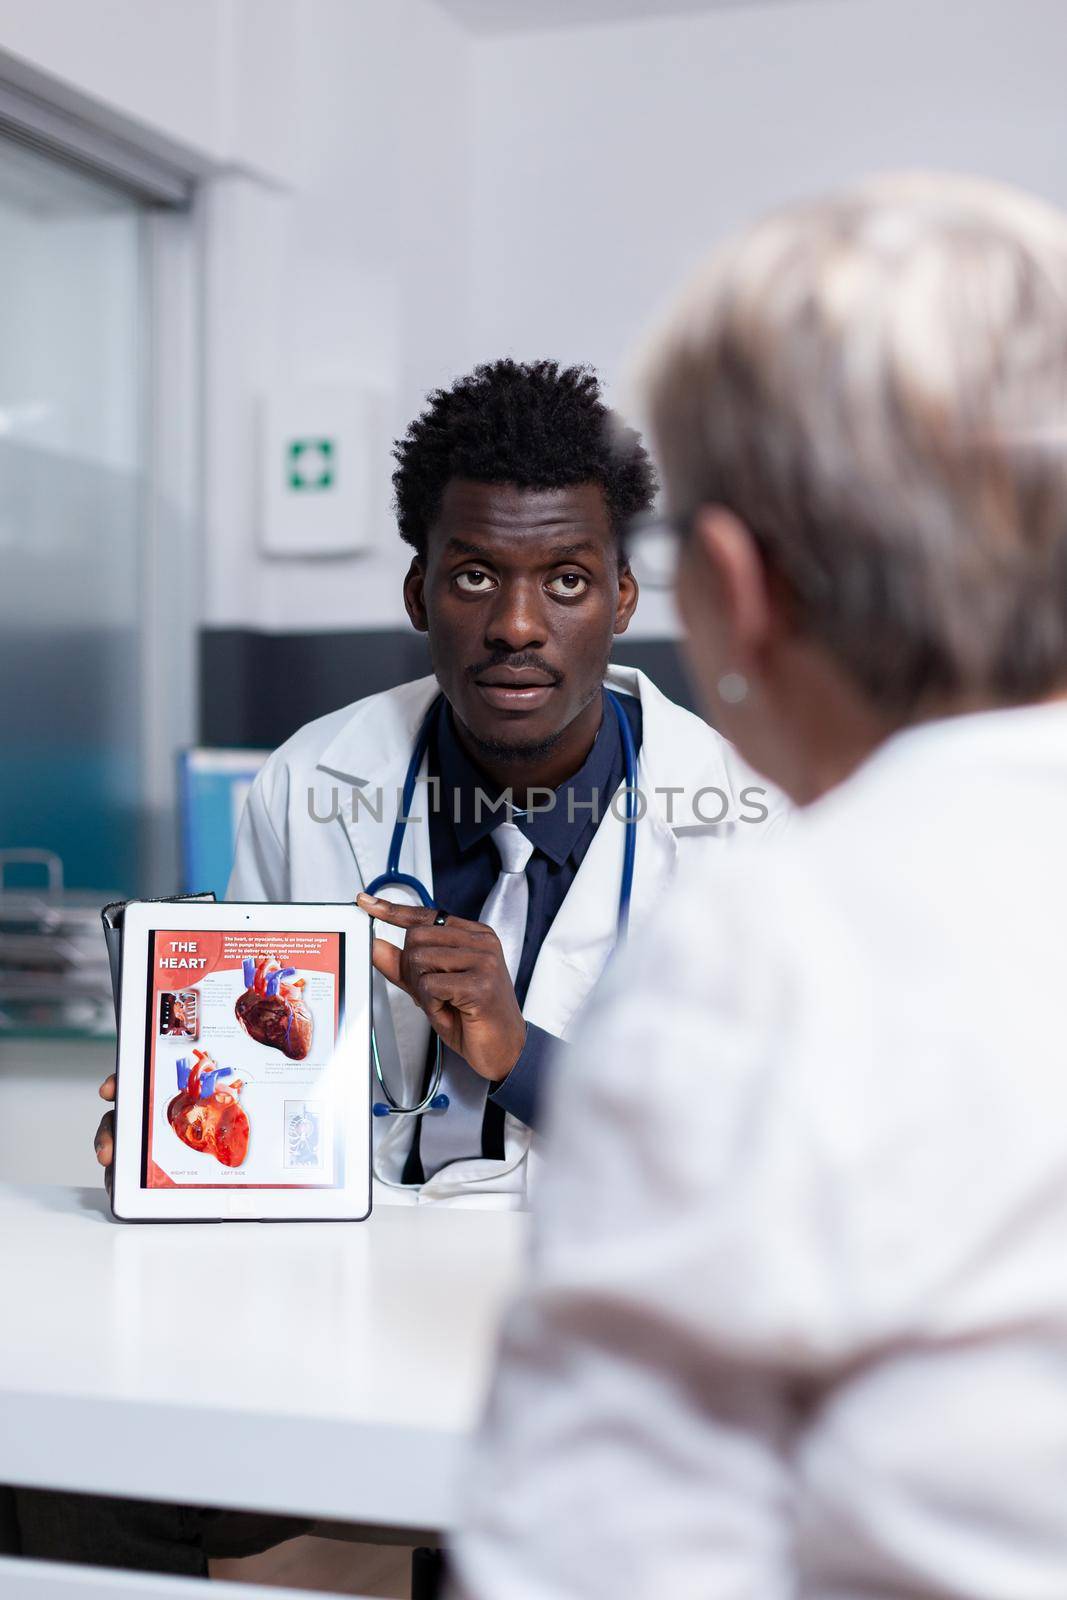 African american man with doctor occupation using tablet showing illustration of organs to old patient for medical diagnosis. Black medic holding digital device for healthcare consultation